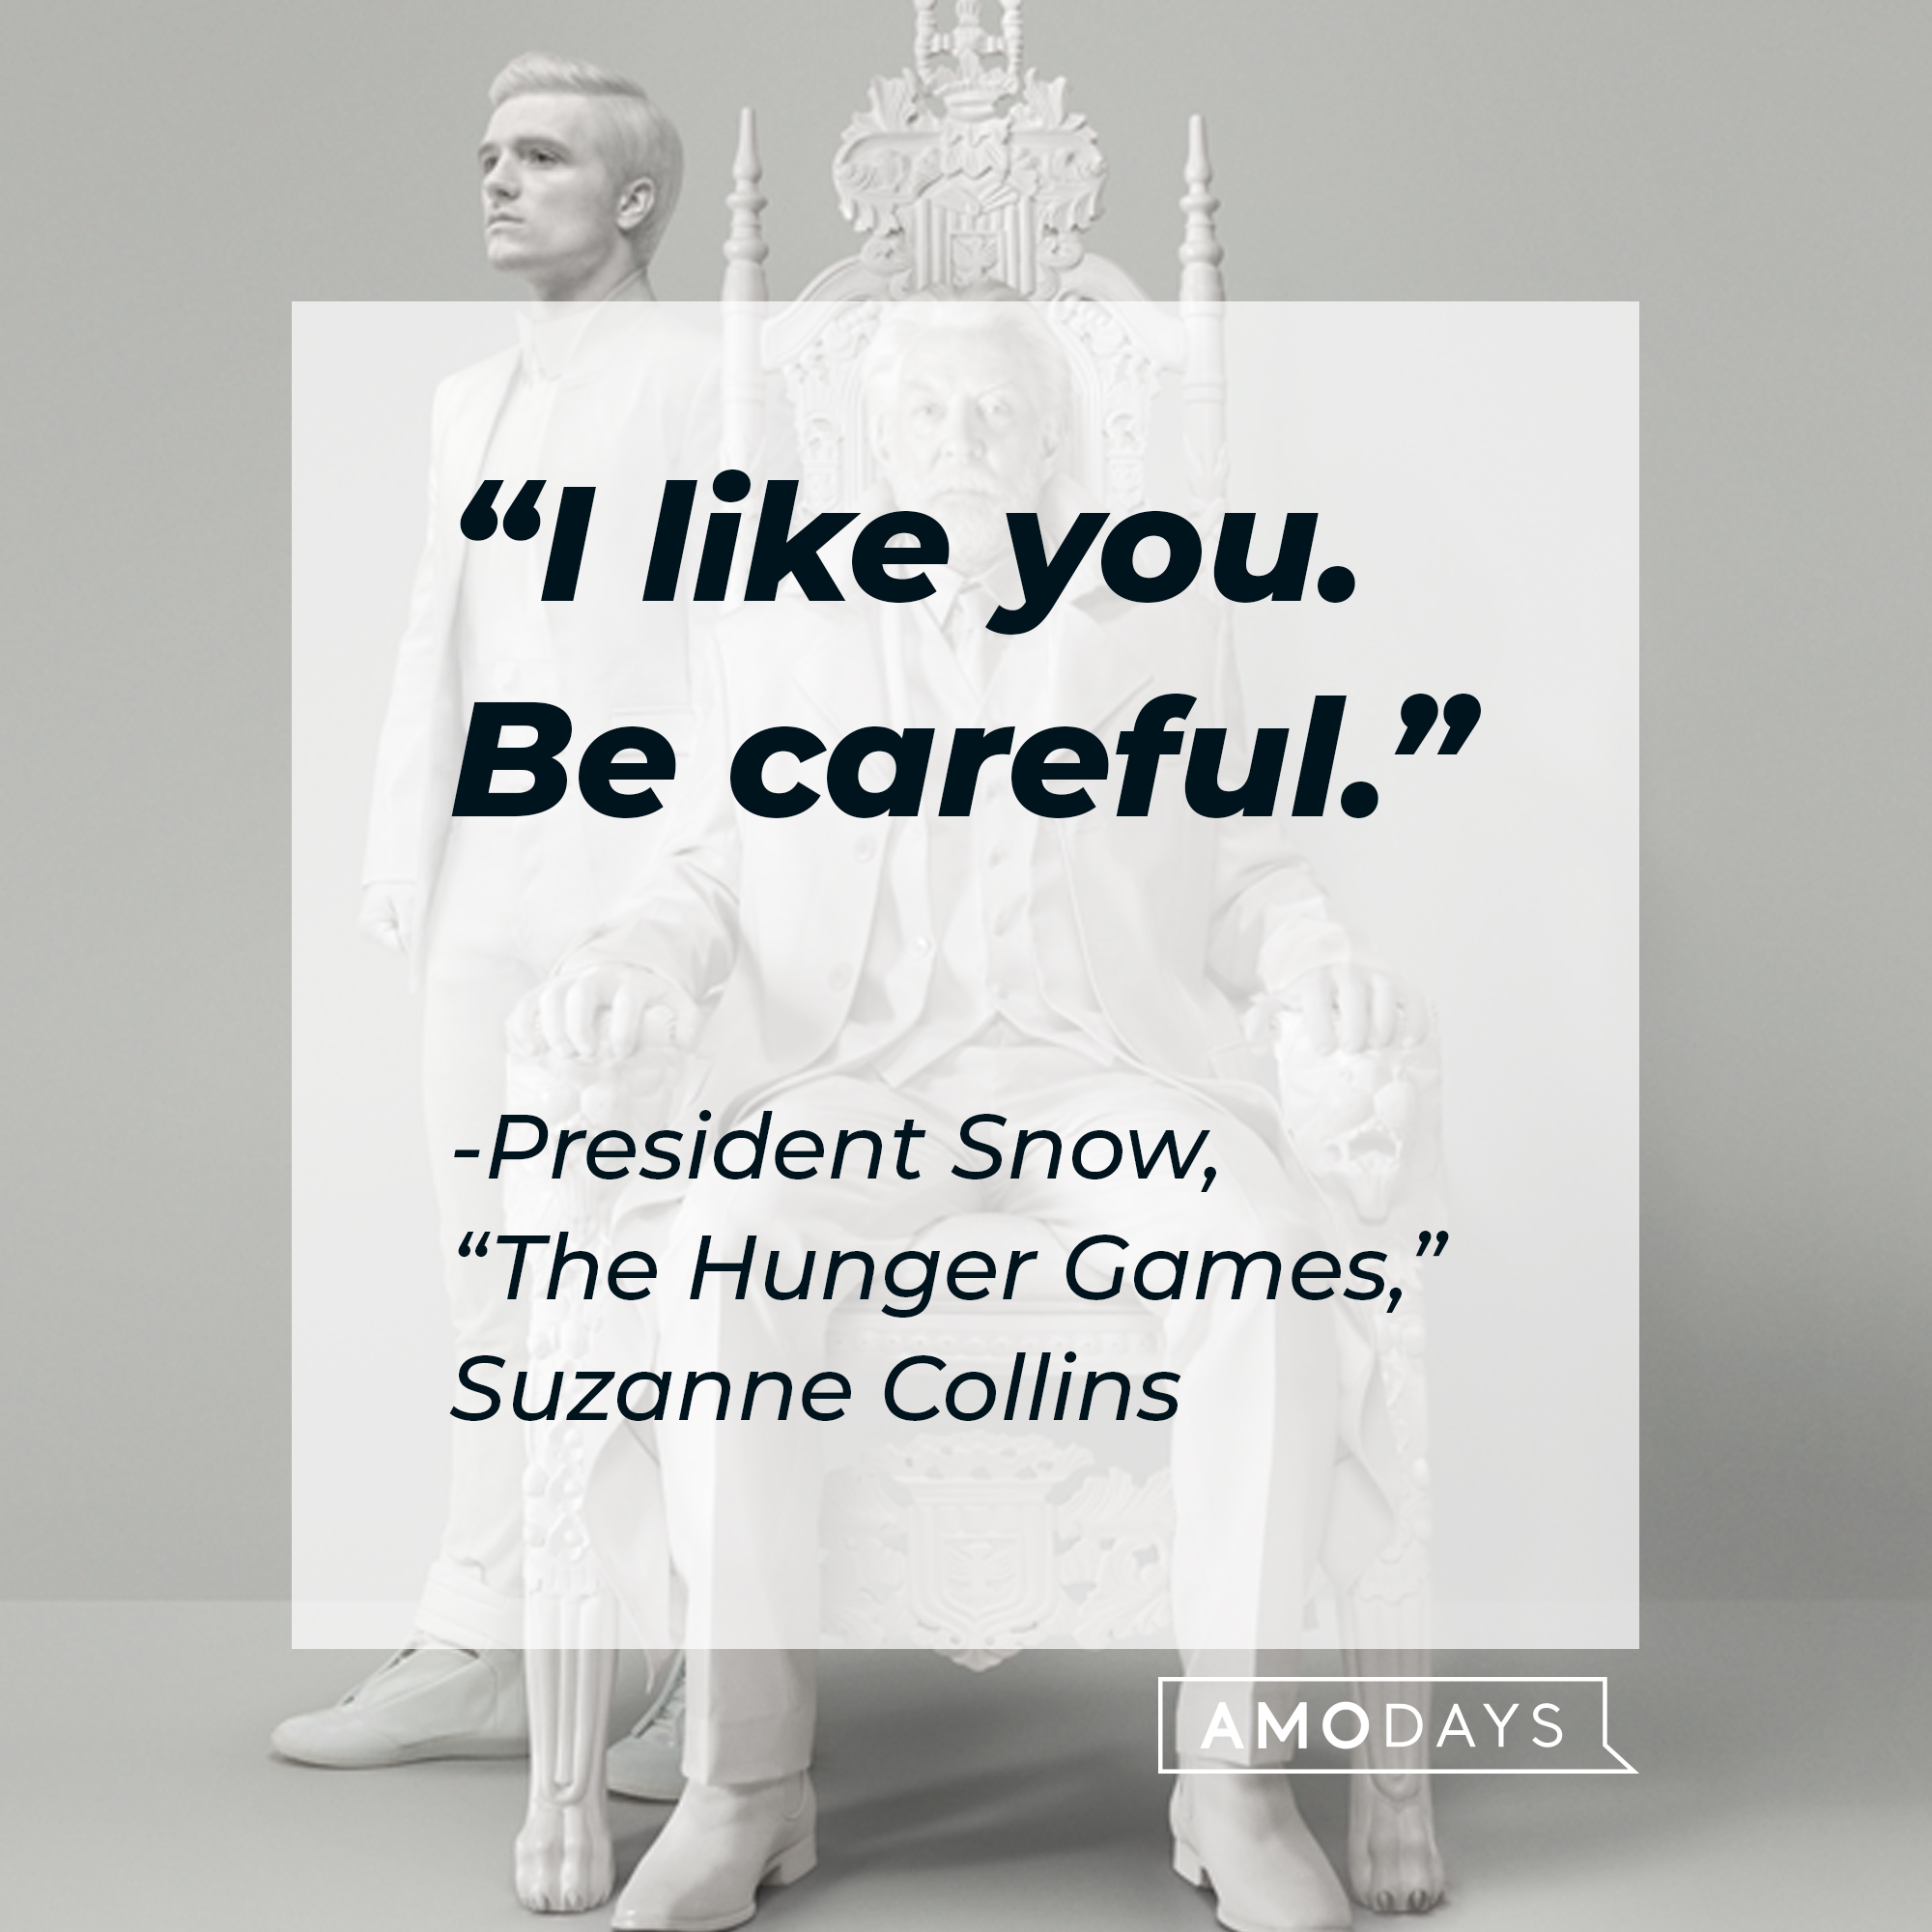 Carvings of President Snow and Peeta Mellark, with Snow’s quote from Suzanne Collins’ “Hunger Games,”: “I like you. Be careful.” | Source: facebook.com/TheHungerGamesMovie